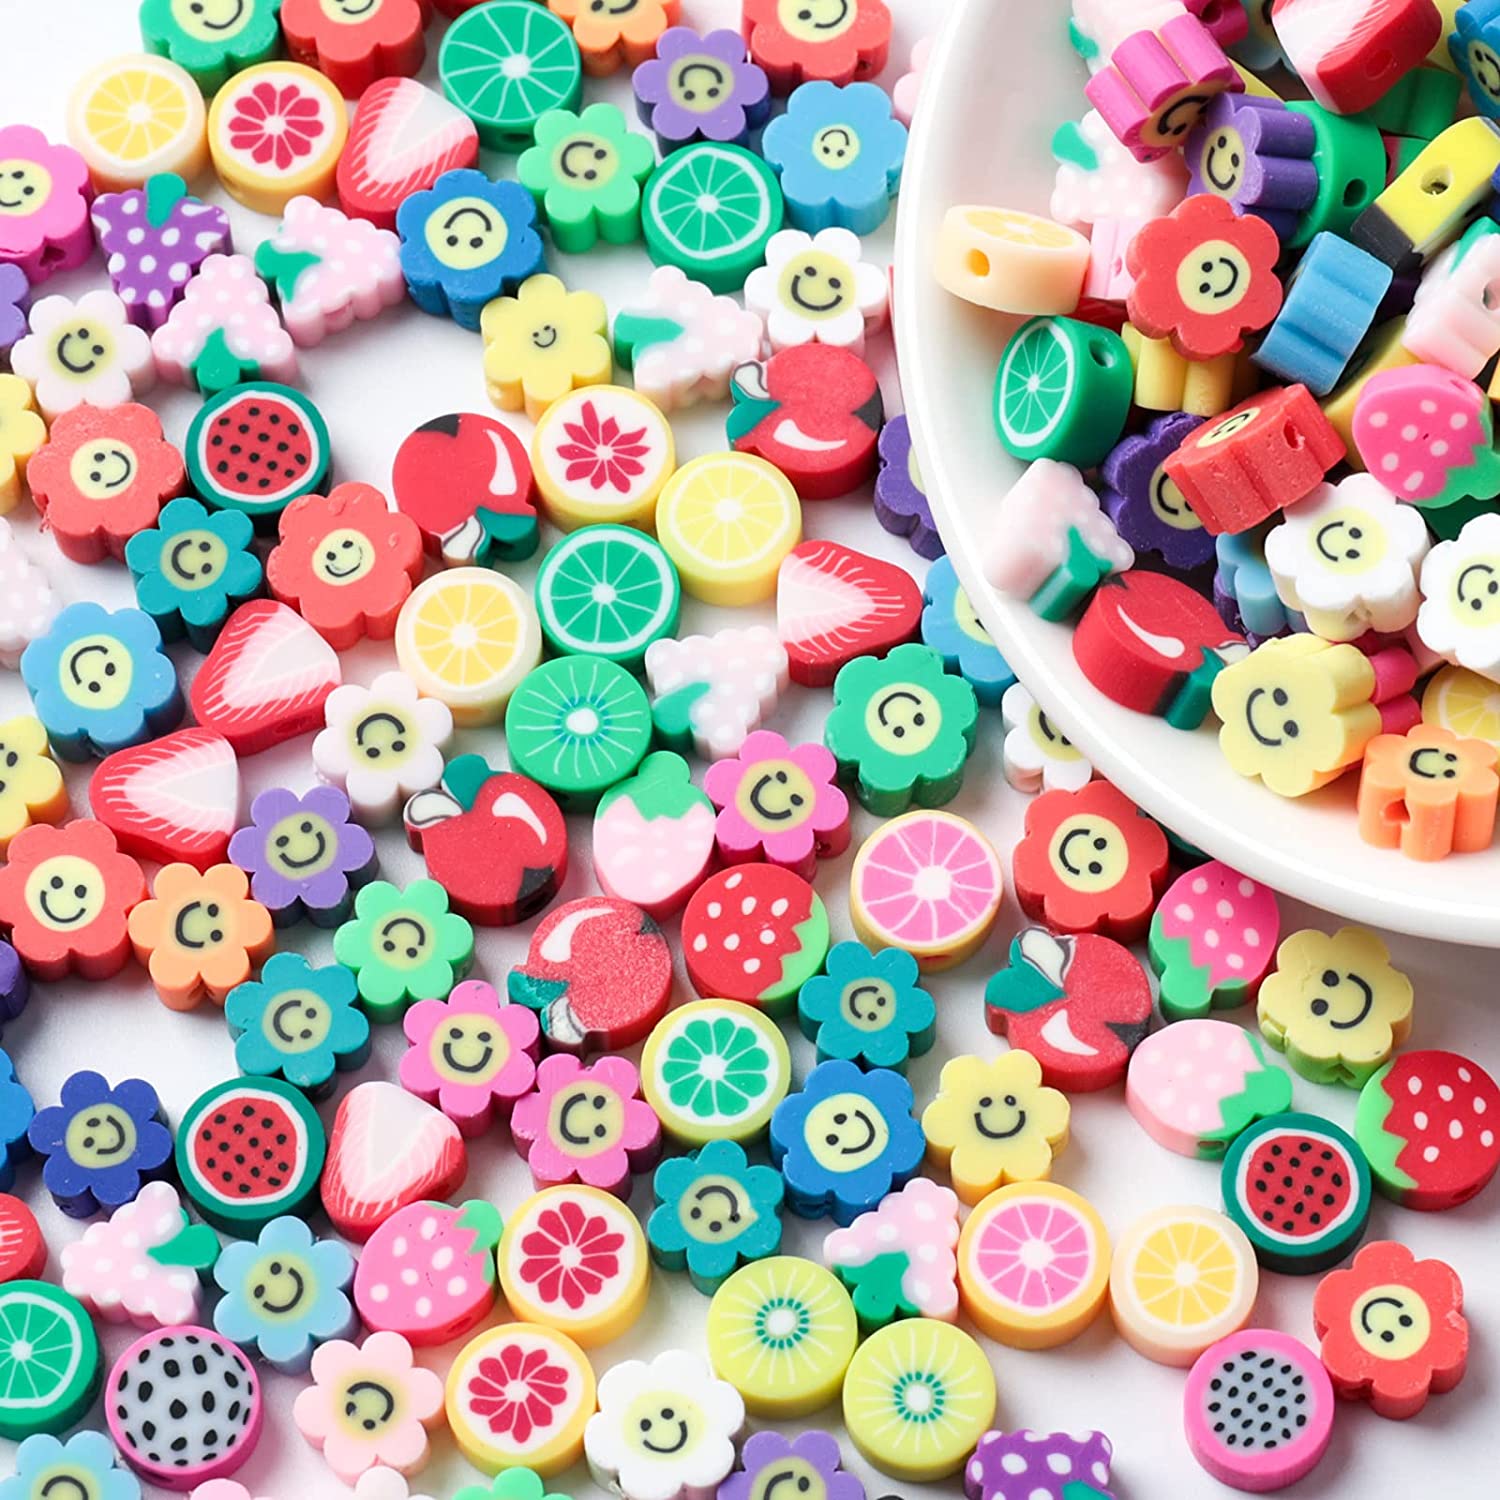 Ninelimi 200pcs Mixed Fruit Spacer Beads Smile Face Beads Color Polymer Clay Beads for DIY Jewelry Bracelet Earring Necklace Craft Making Supplies, 20